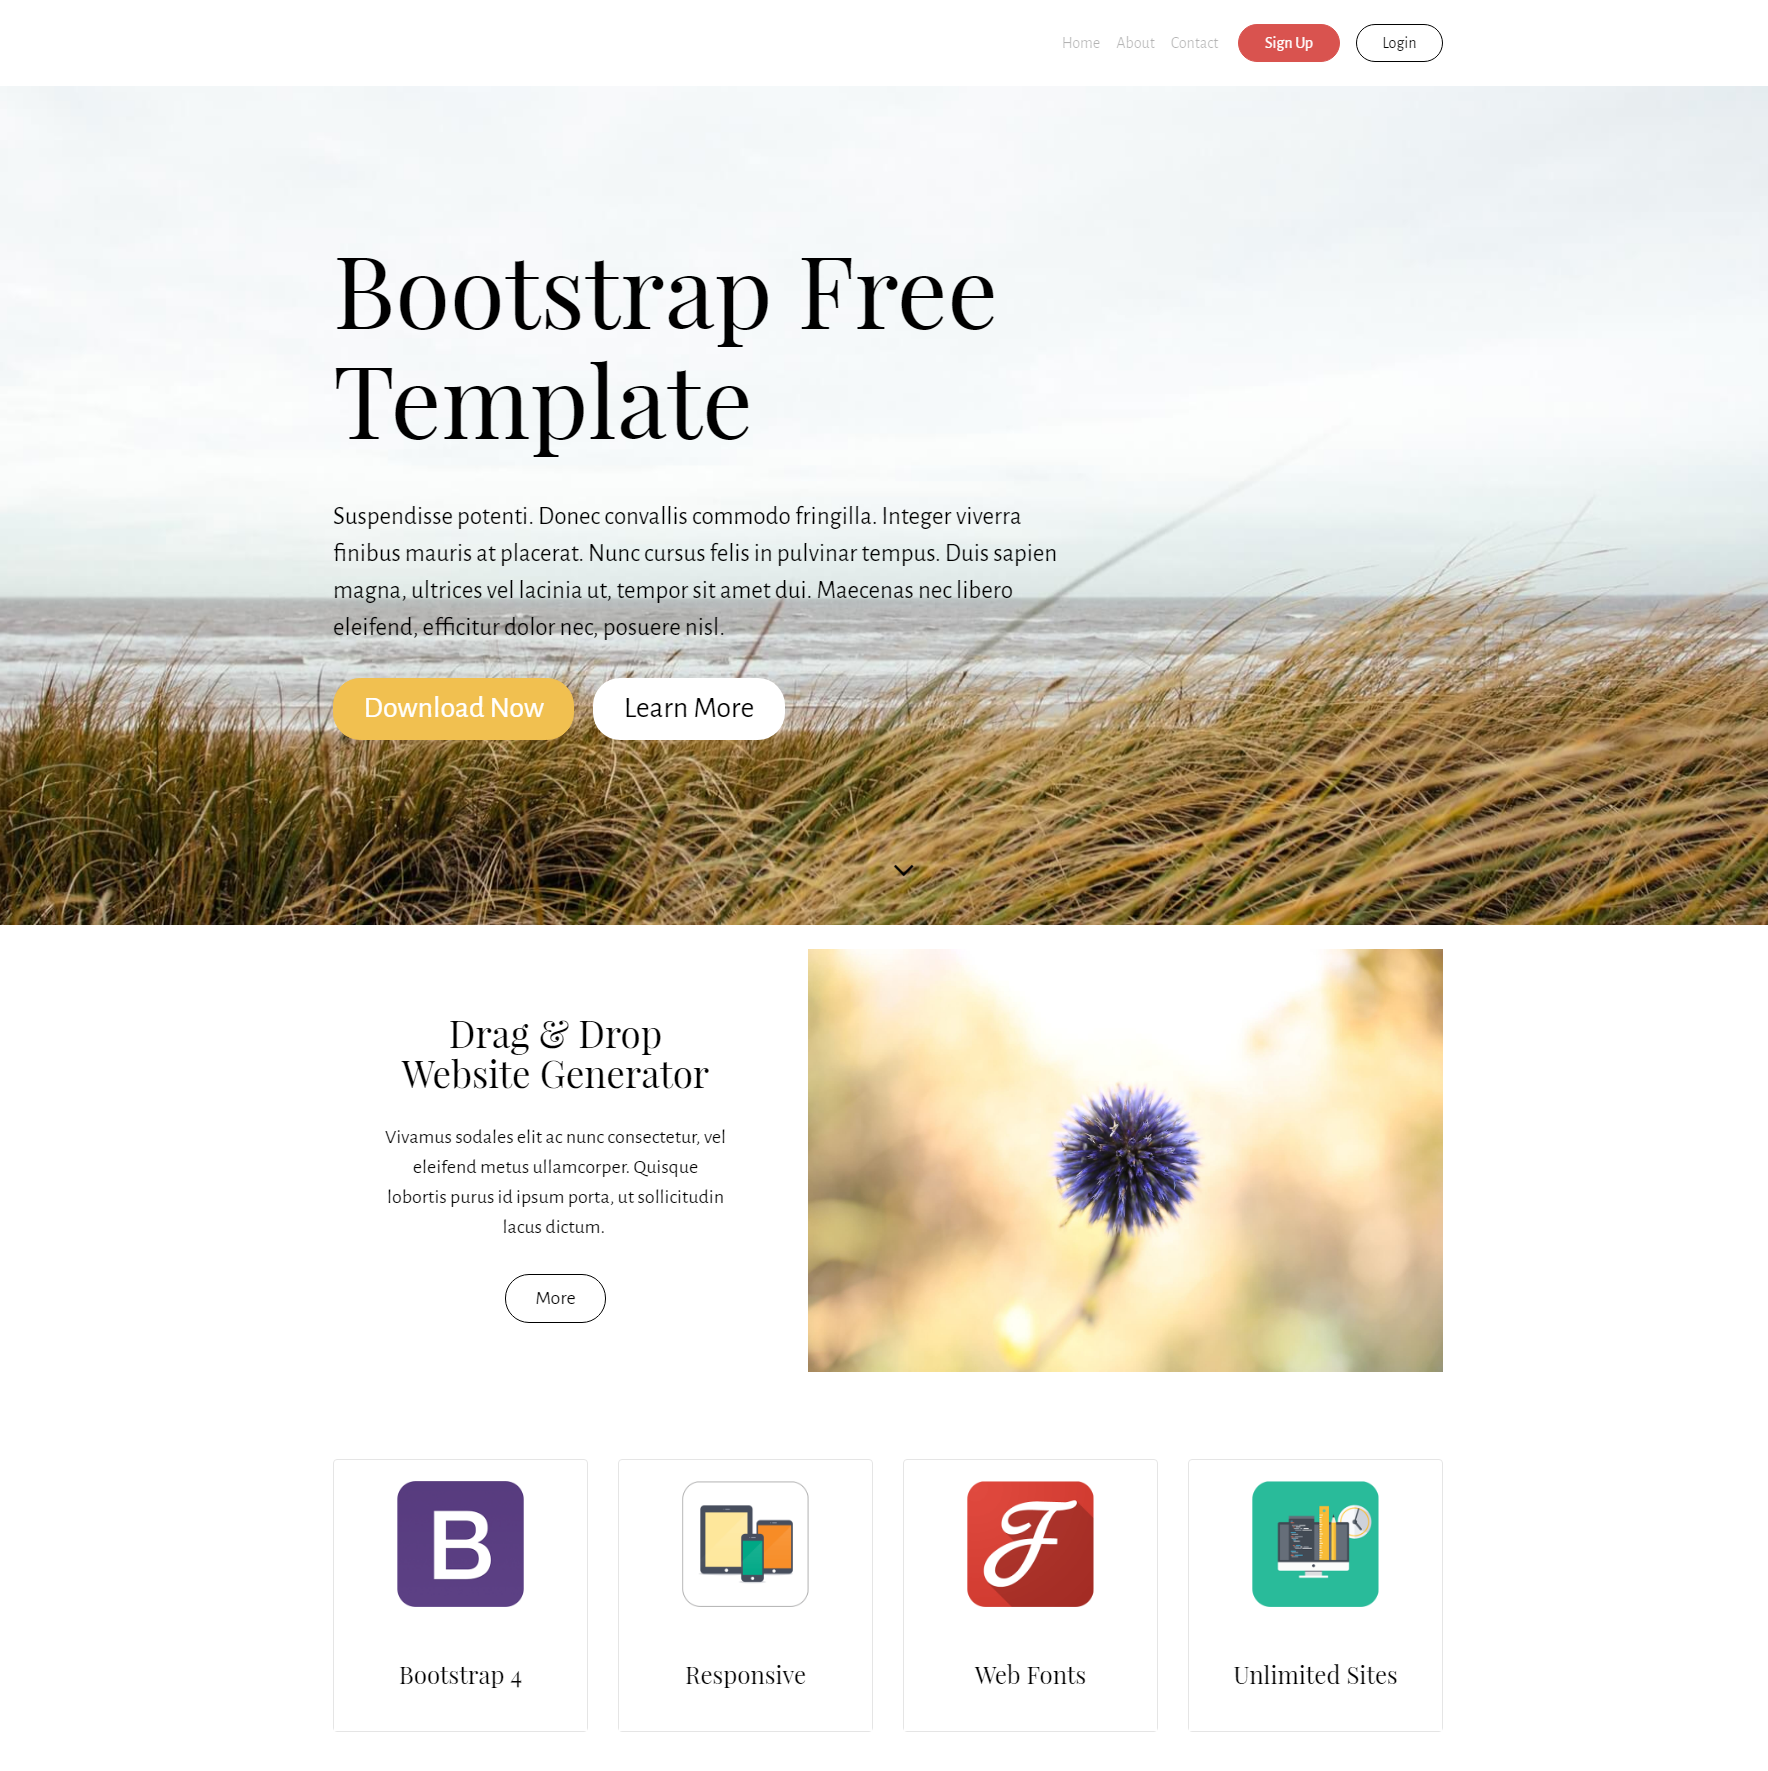 Responsive Bootstrap Free Templates